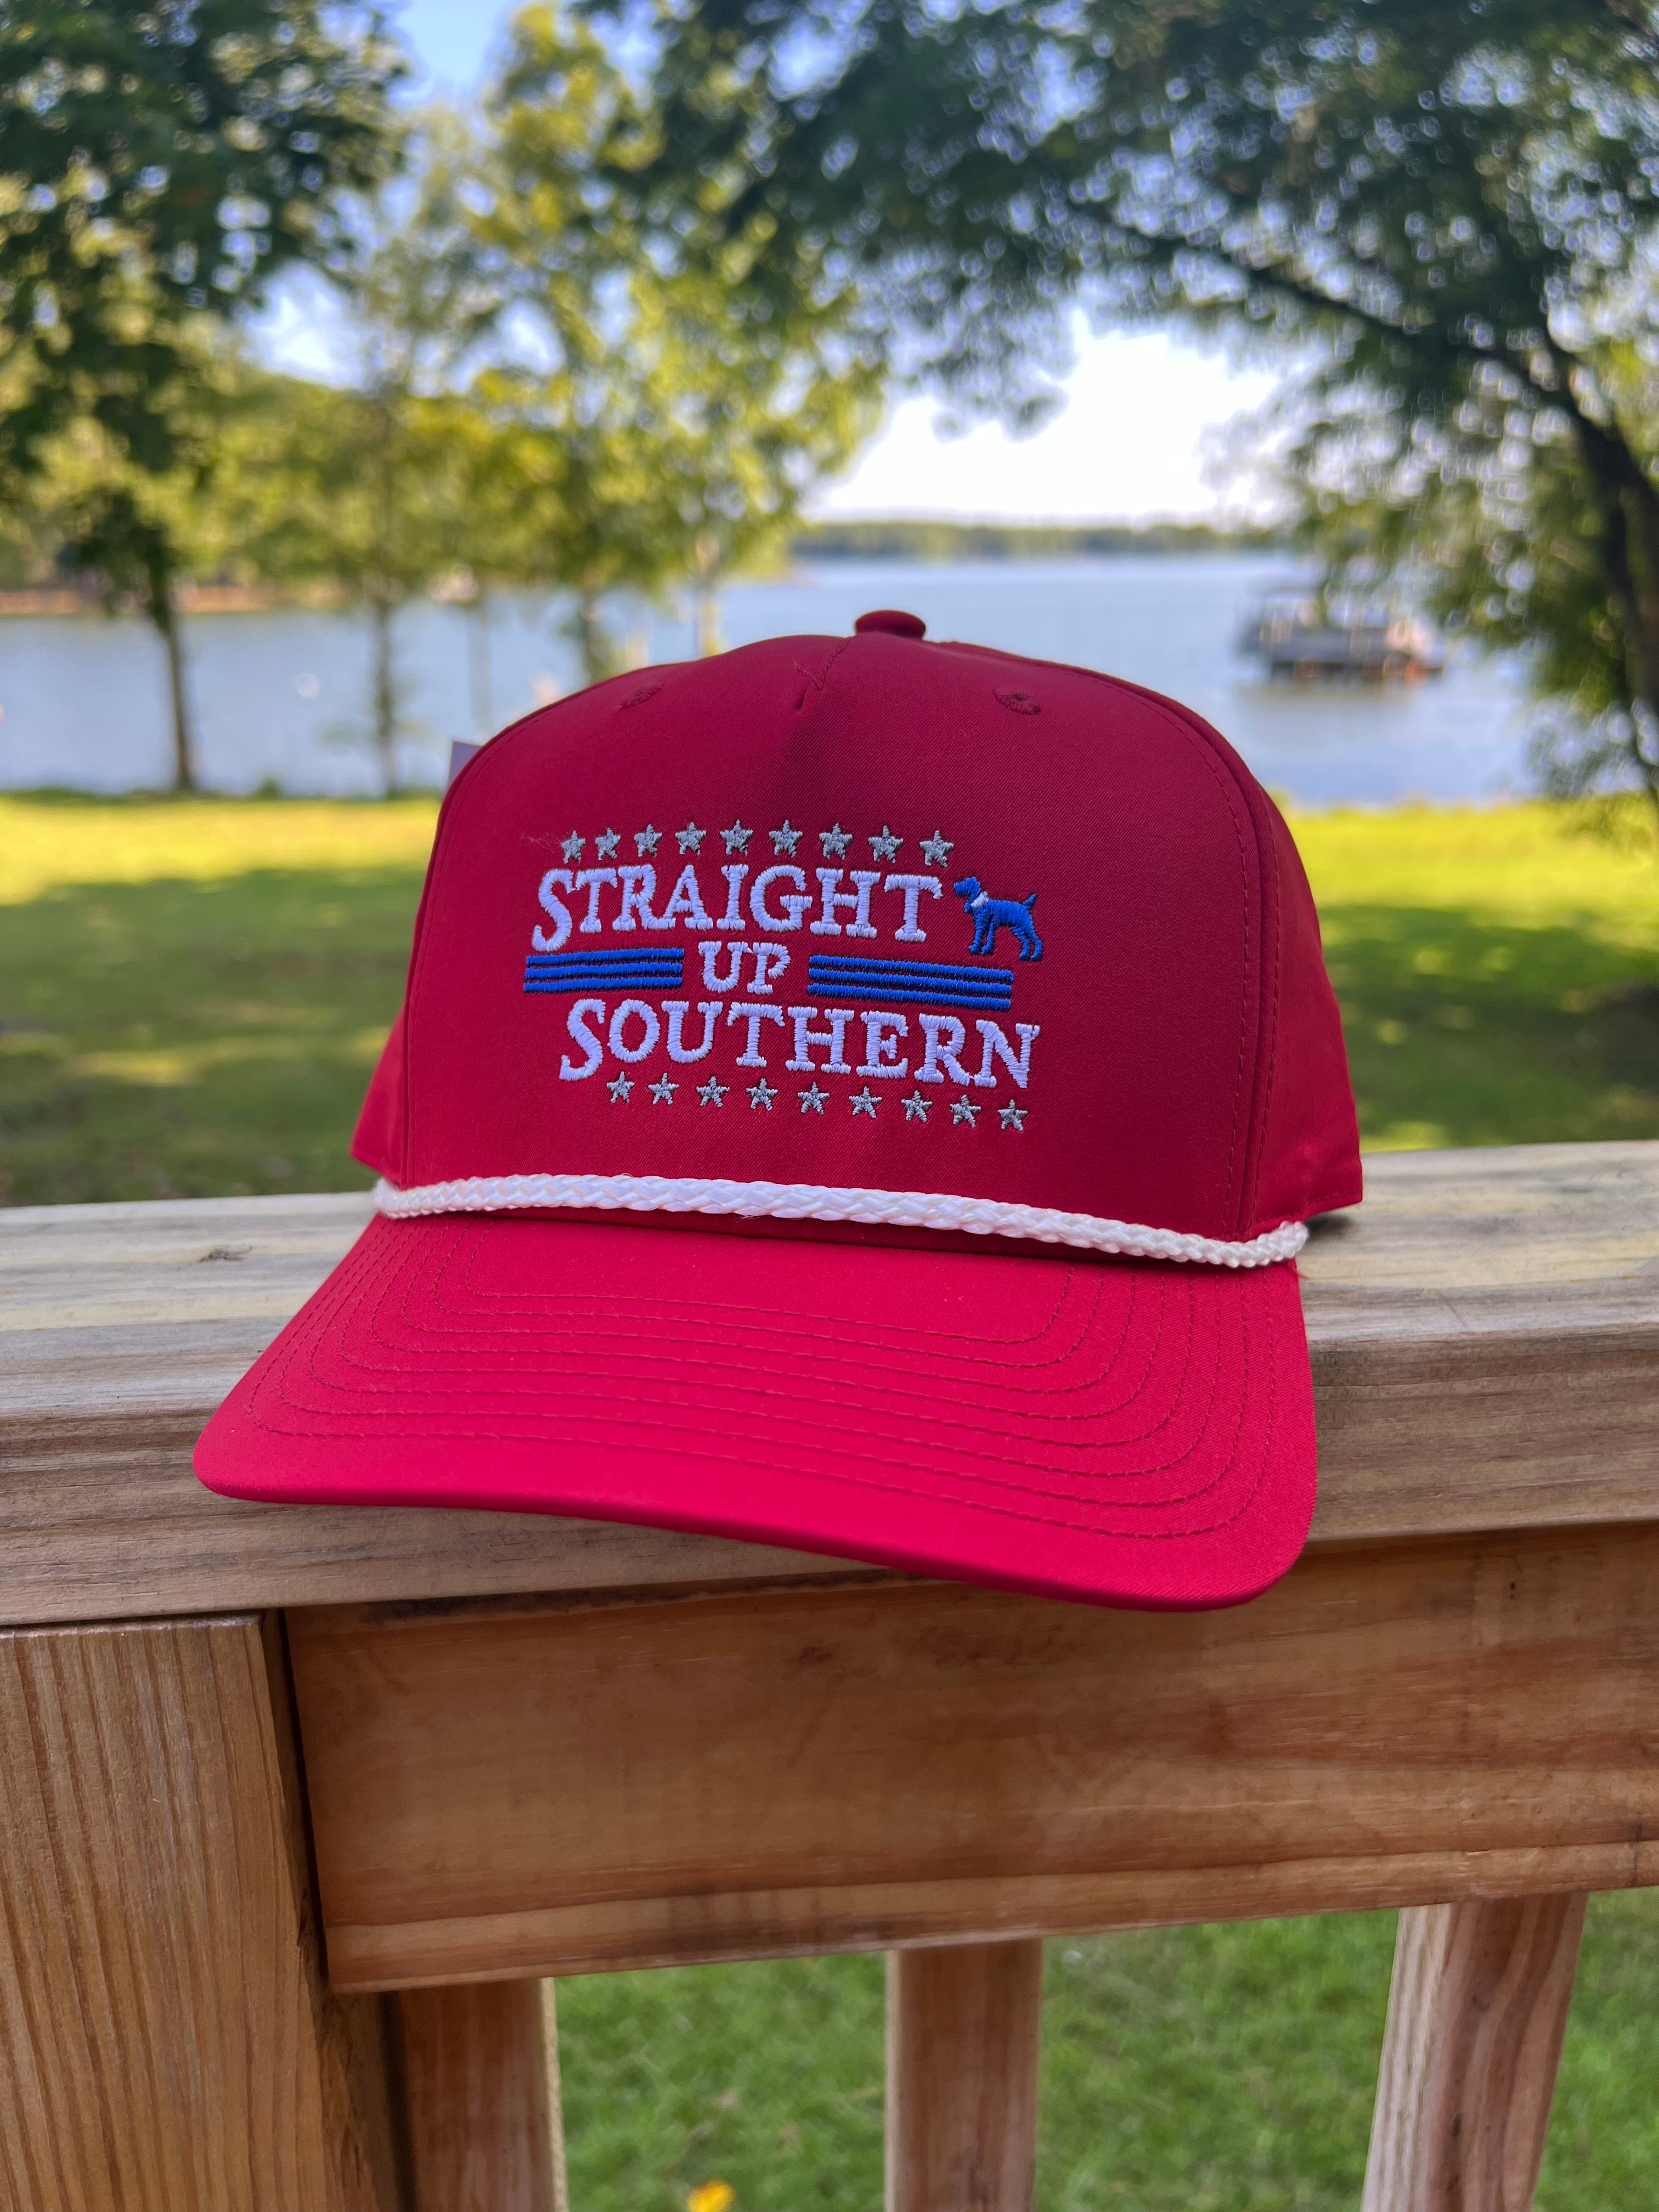 Elect Straight Up Southern - Rope Cap - Red